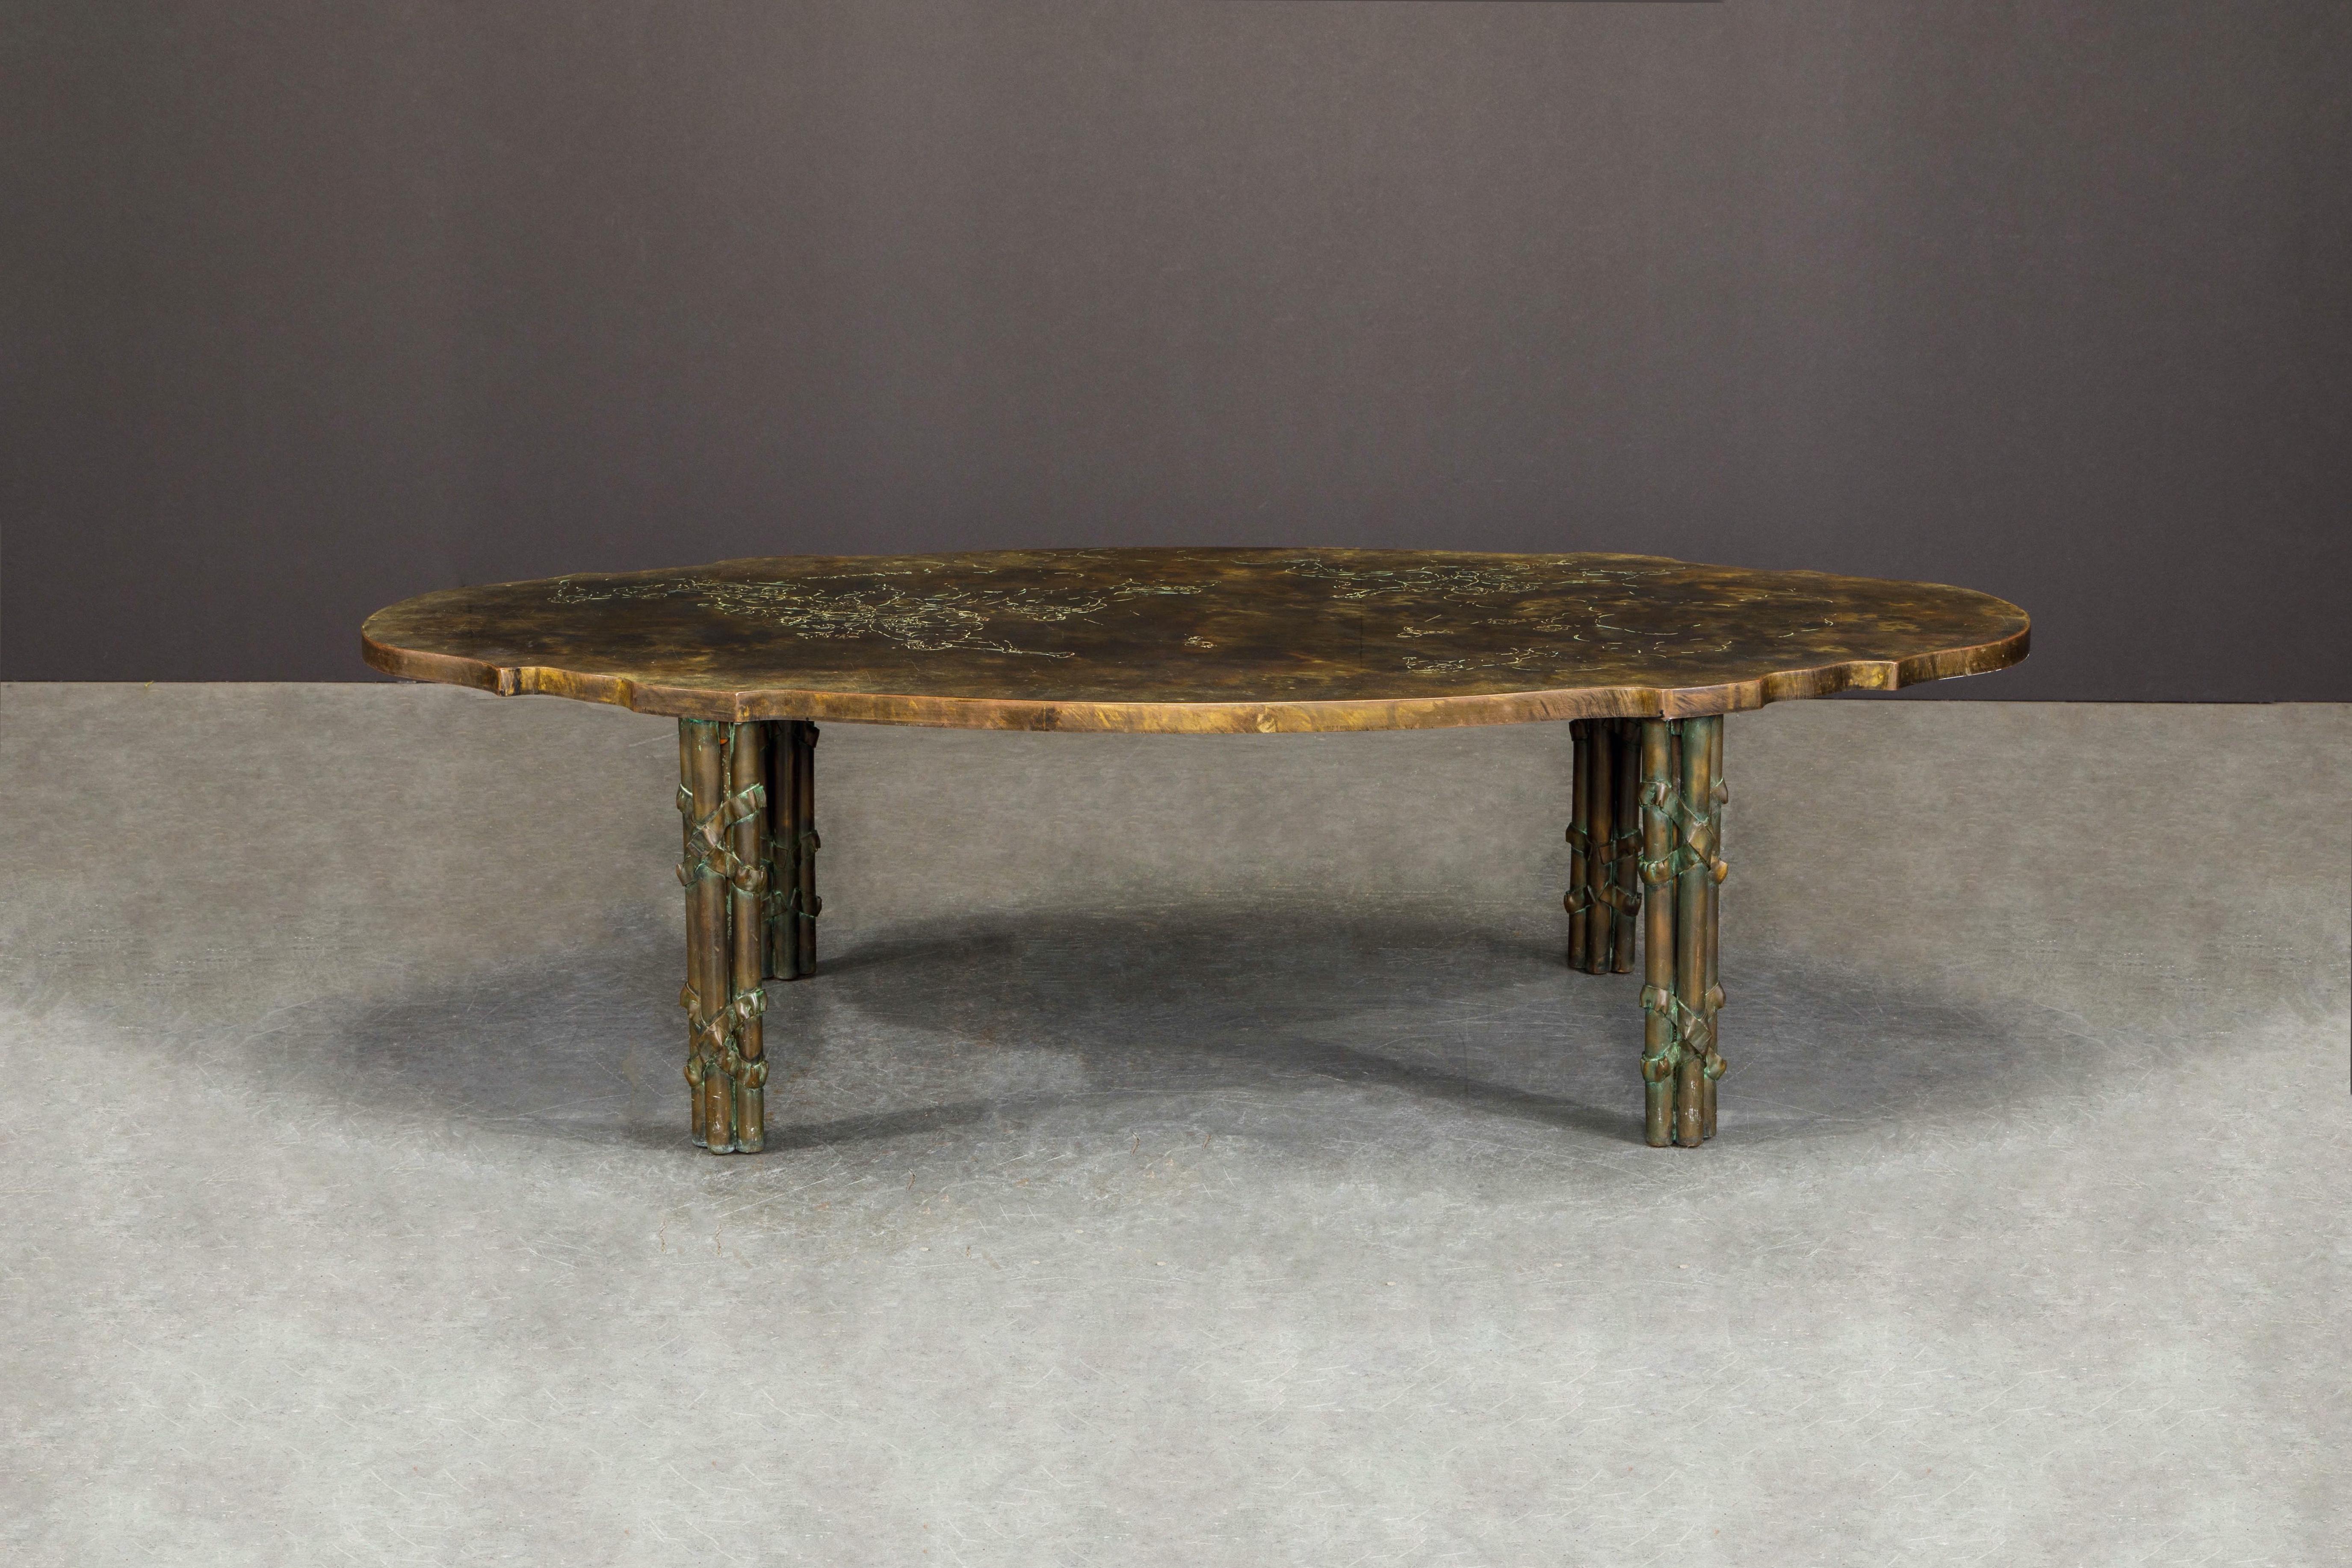 This is an excellent collectors example of the rare and sought after 'Classical Boucher' sculpted oval cocktail table by father and son team, Philip and Kelvin LaVerne, produced in the 1960s. Ingeniously designed with hand carved burnished bronze